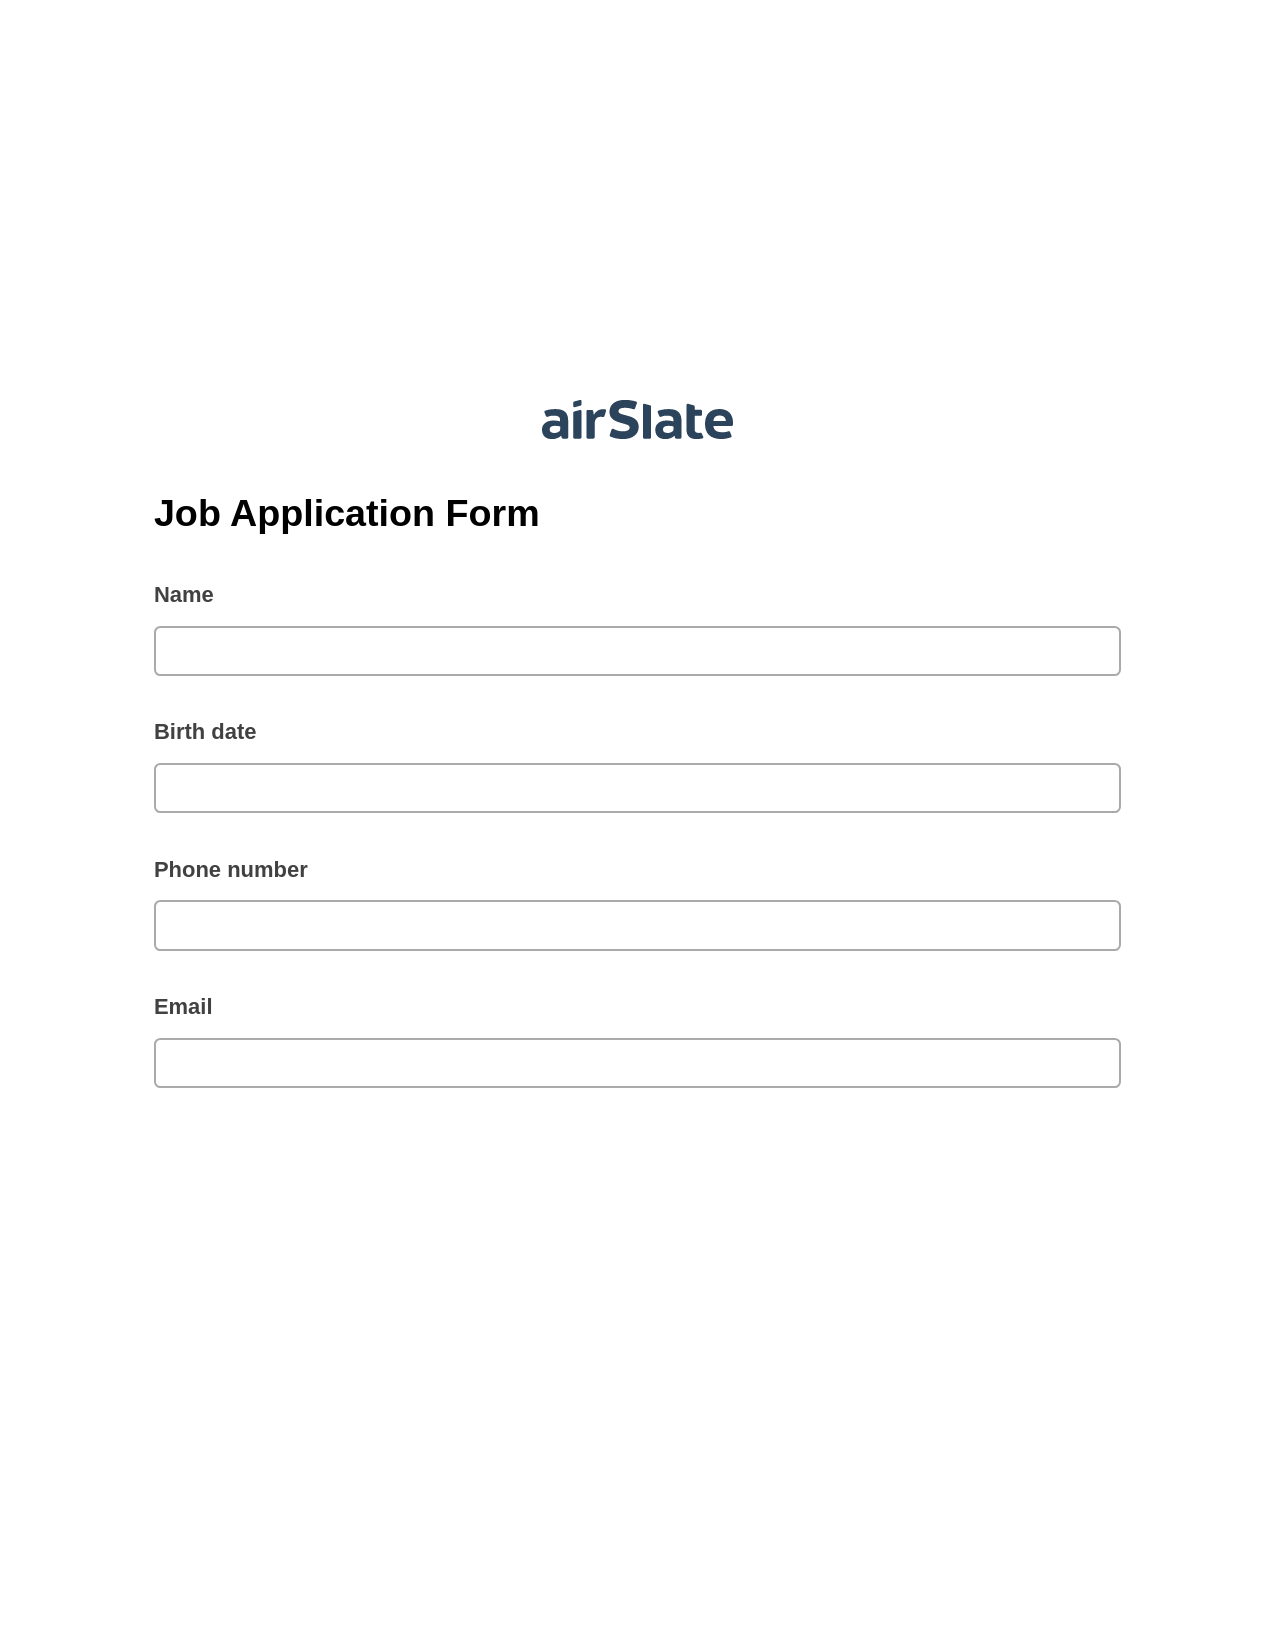 Job Application Form Pre-fill from Salesforce Records with SOQL Bot, Webhook Bot, Export to NetSuite Record Bot